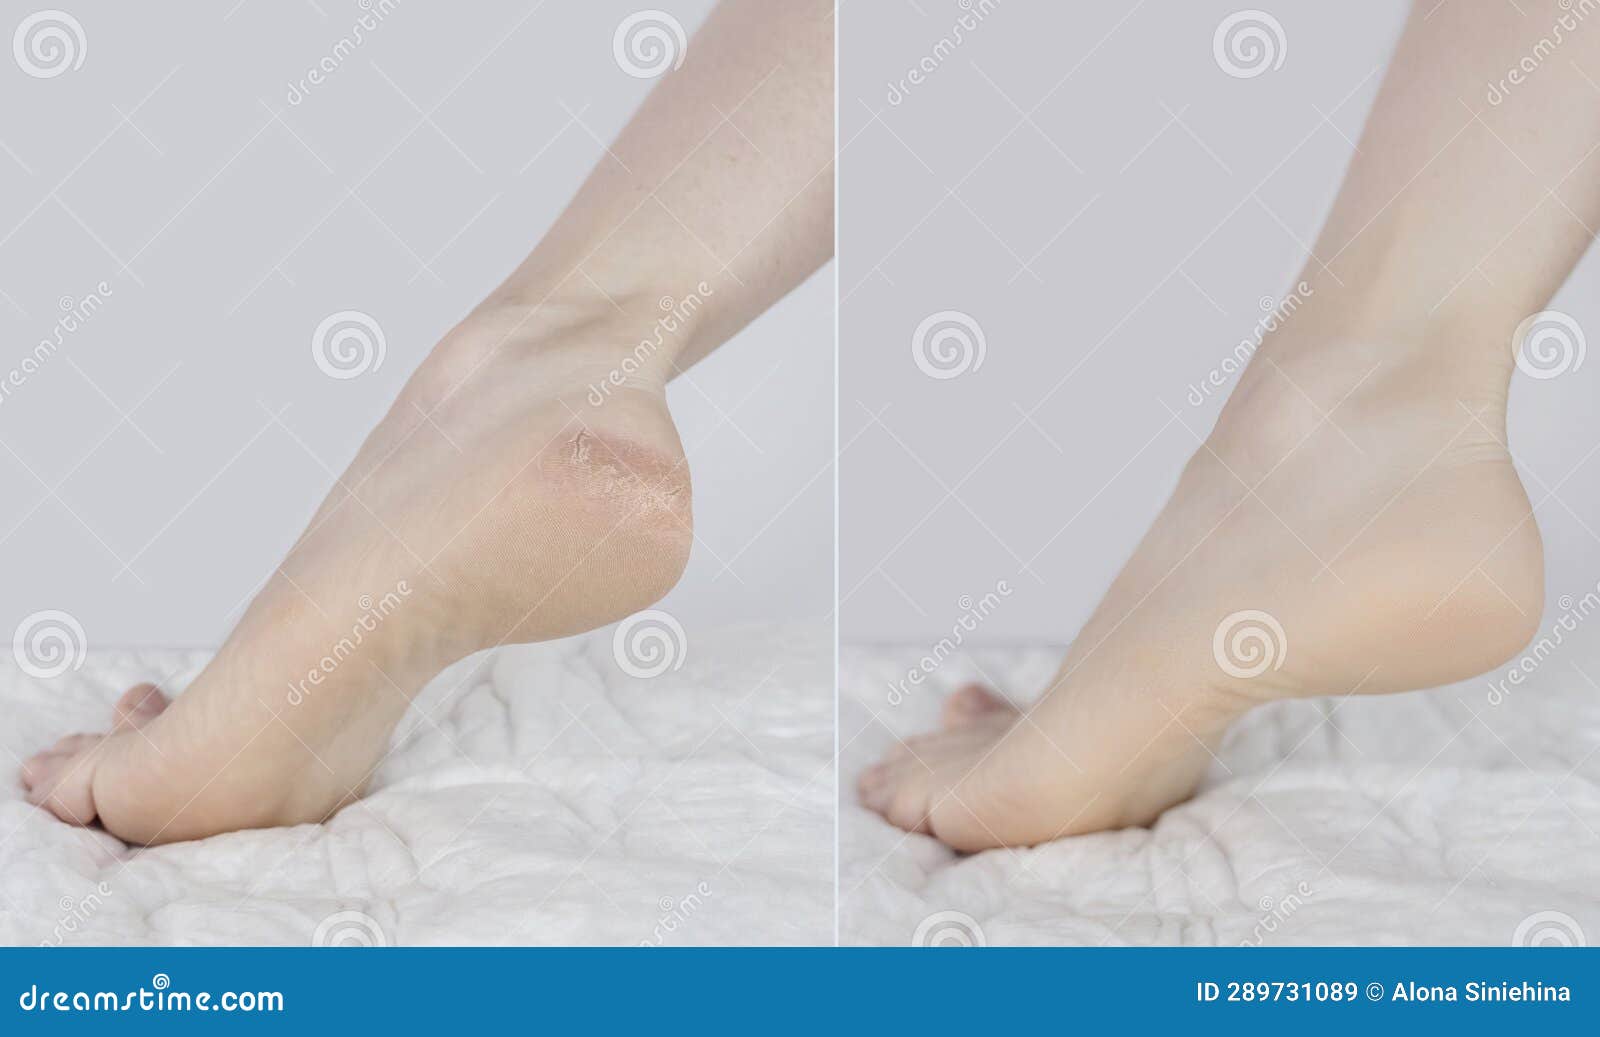 Cracked Heels. Woman Feet Before And After Procedures To Soften Rough Skin.  Urea Cream, Oil For Care Of Keratinized Skin, Healing Of Cracked Foot.  Usage Foot Grater, Cream With Urea, Softening Oil.